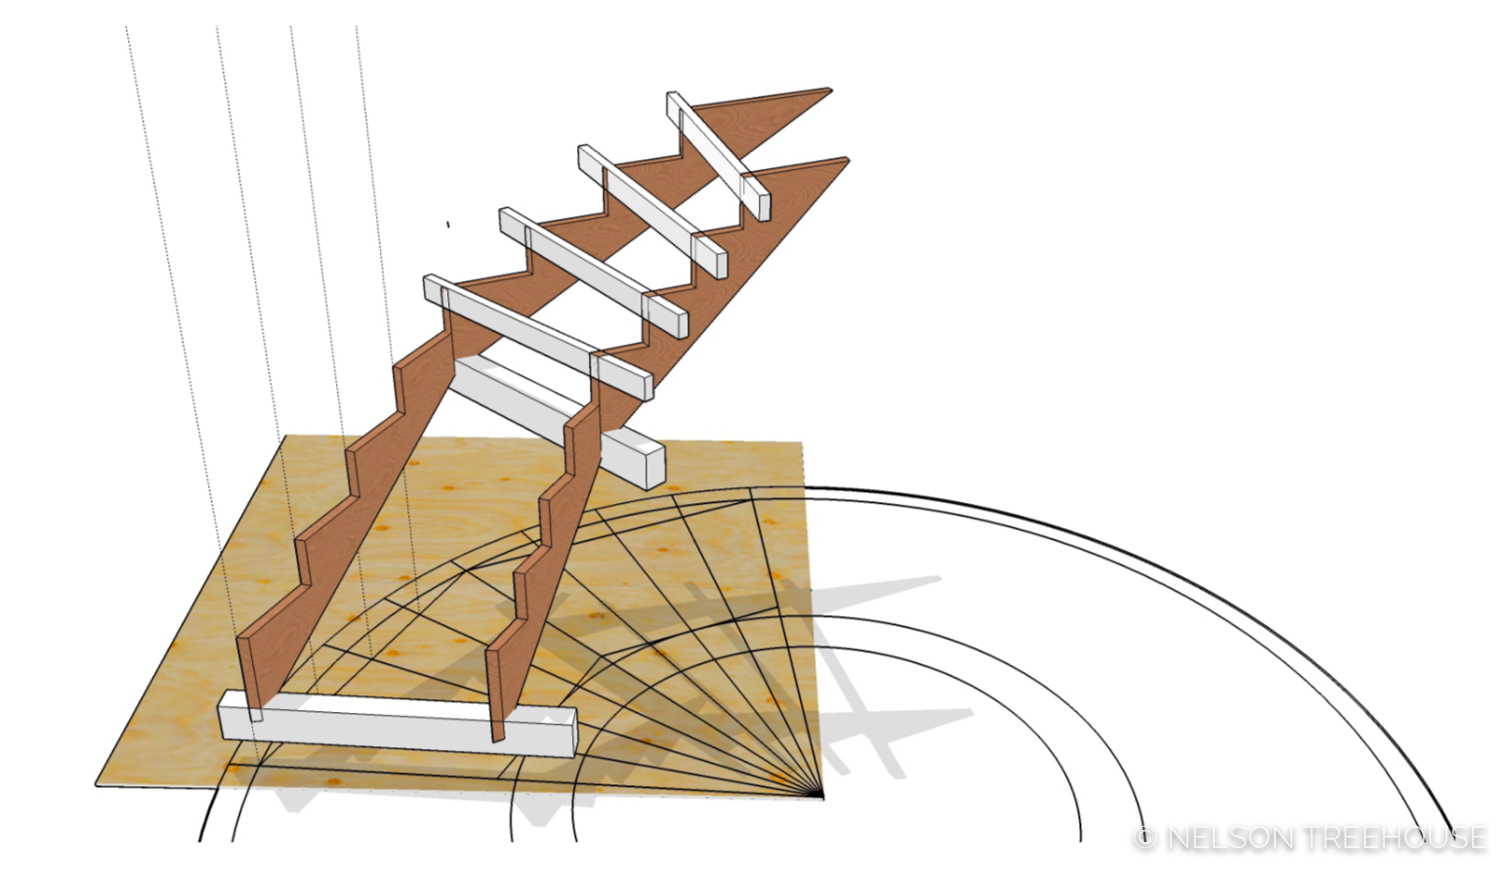 Winding Stairs: Design and Construction - Nelson Treehouse